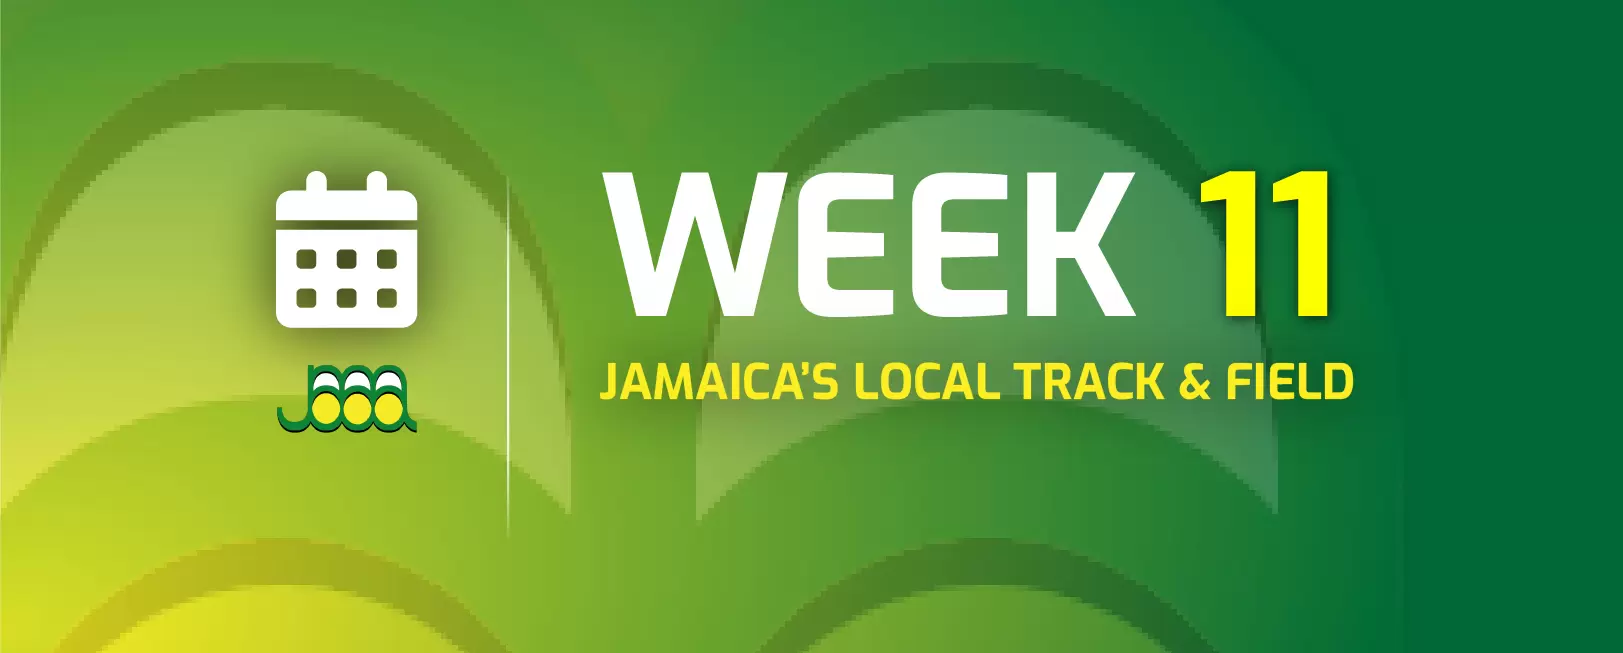 Featured Image for [This Week in Jamaica’s Local Track & Field 2023, Week 11] article